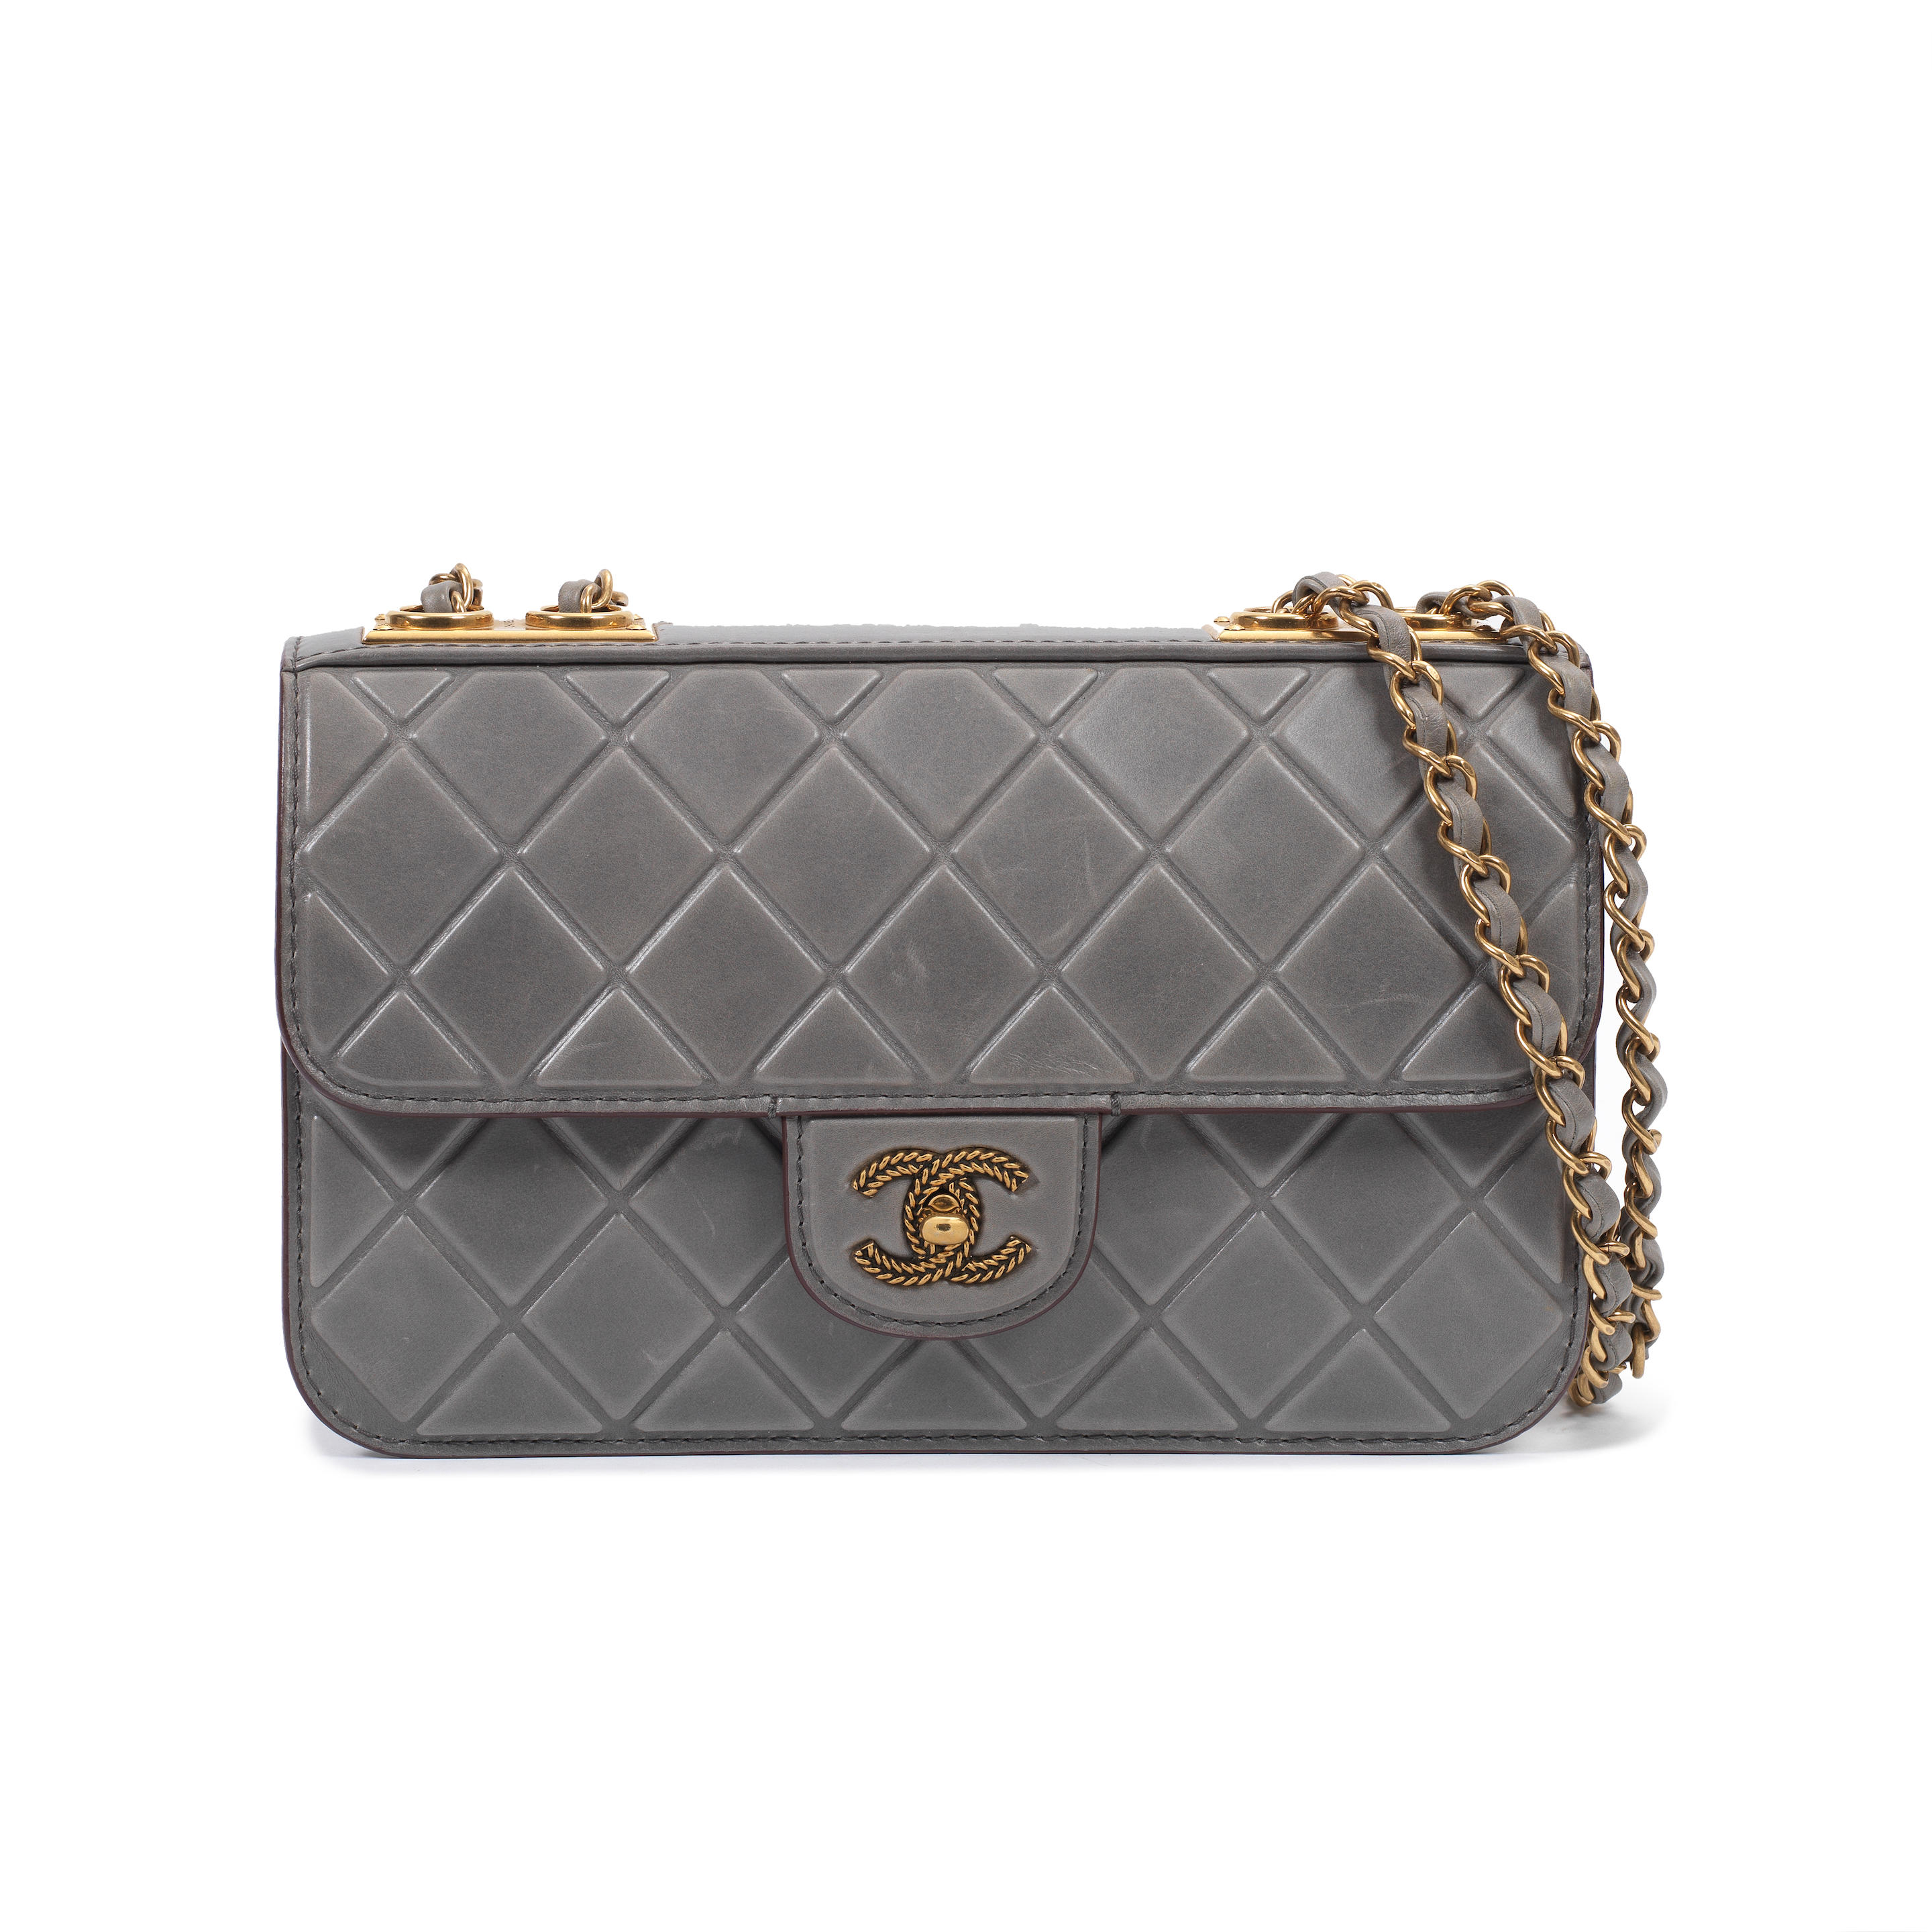 Bonhams : Chanel a Grey Debossed Quilted Calfskin Single Flap Bag 2015-16  (includes serial sticker, authenticity card and dust bag)